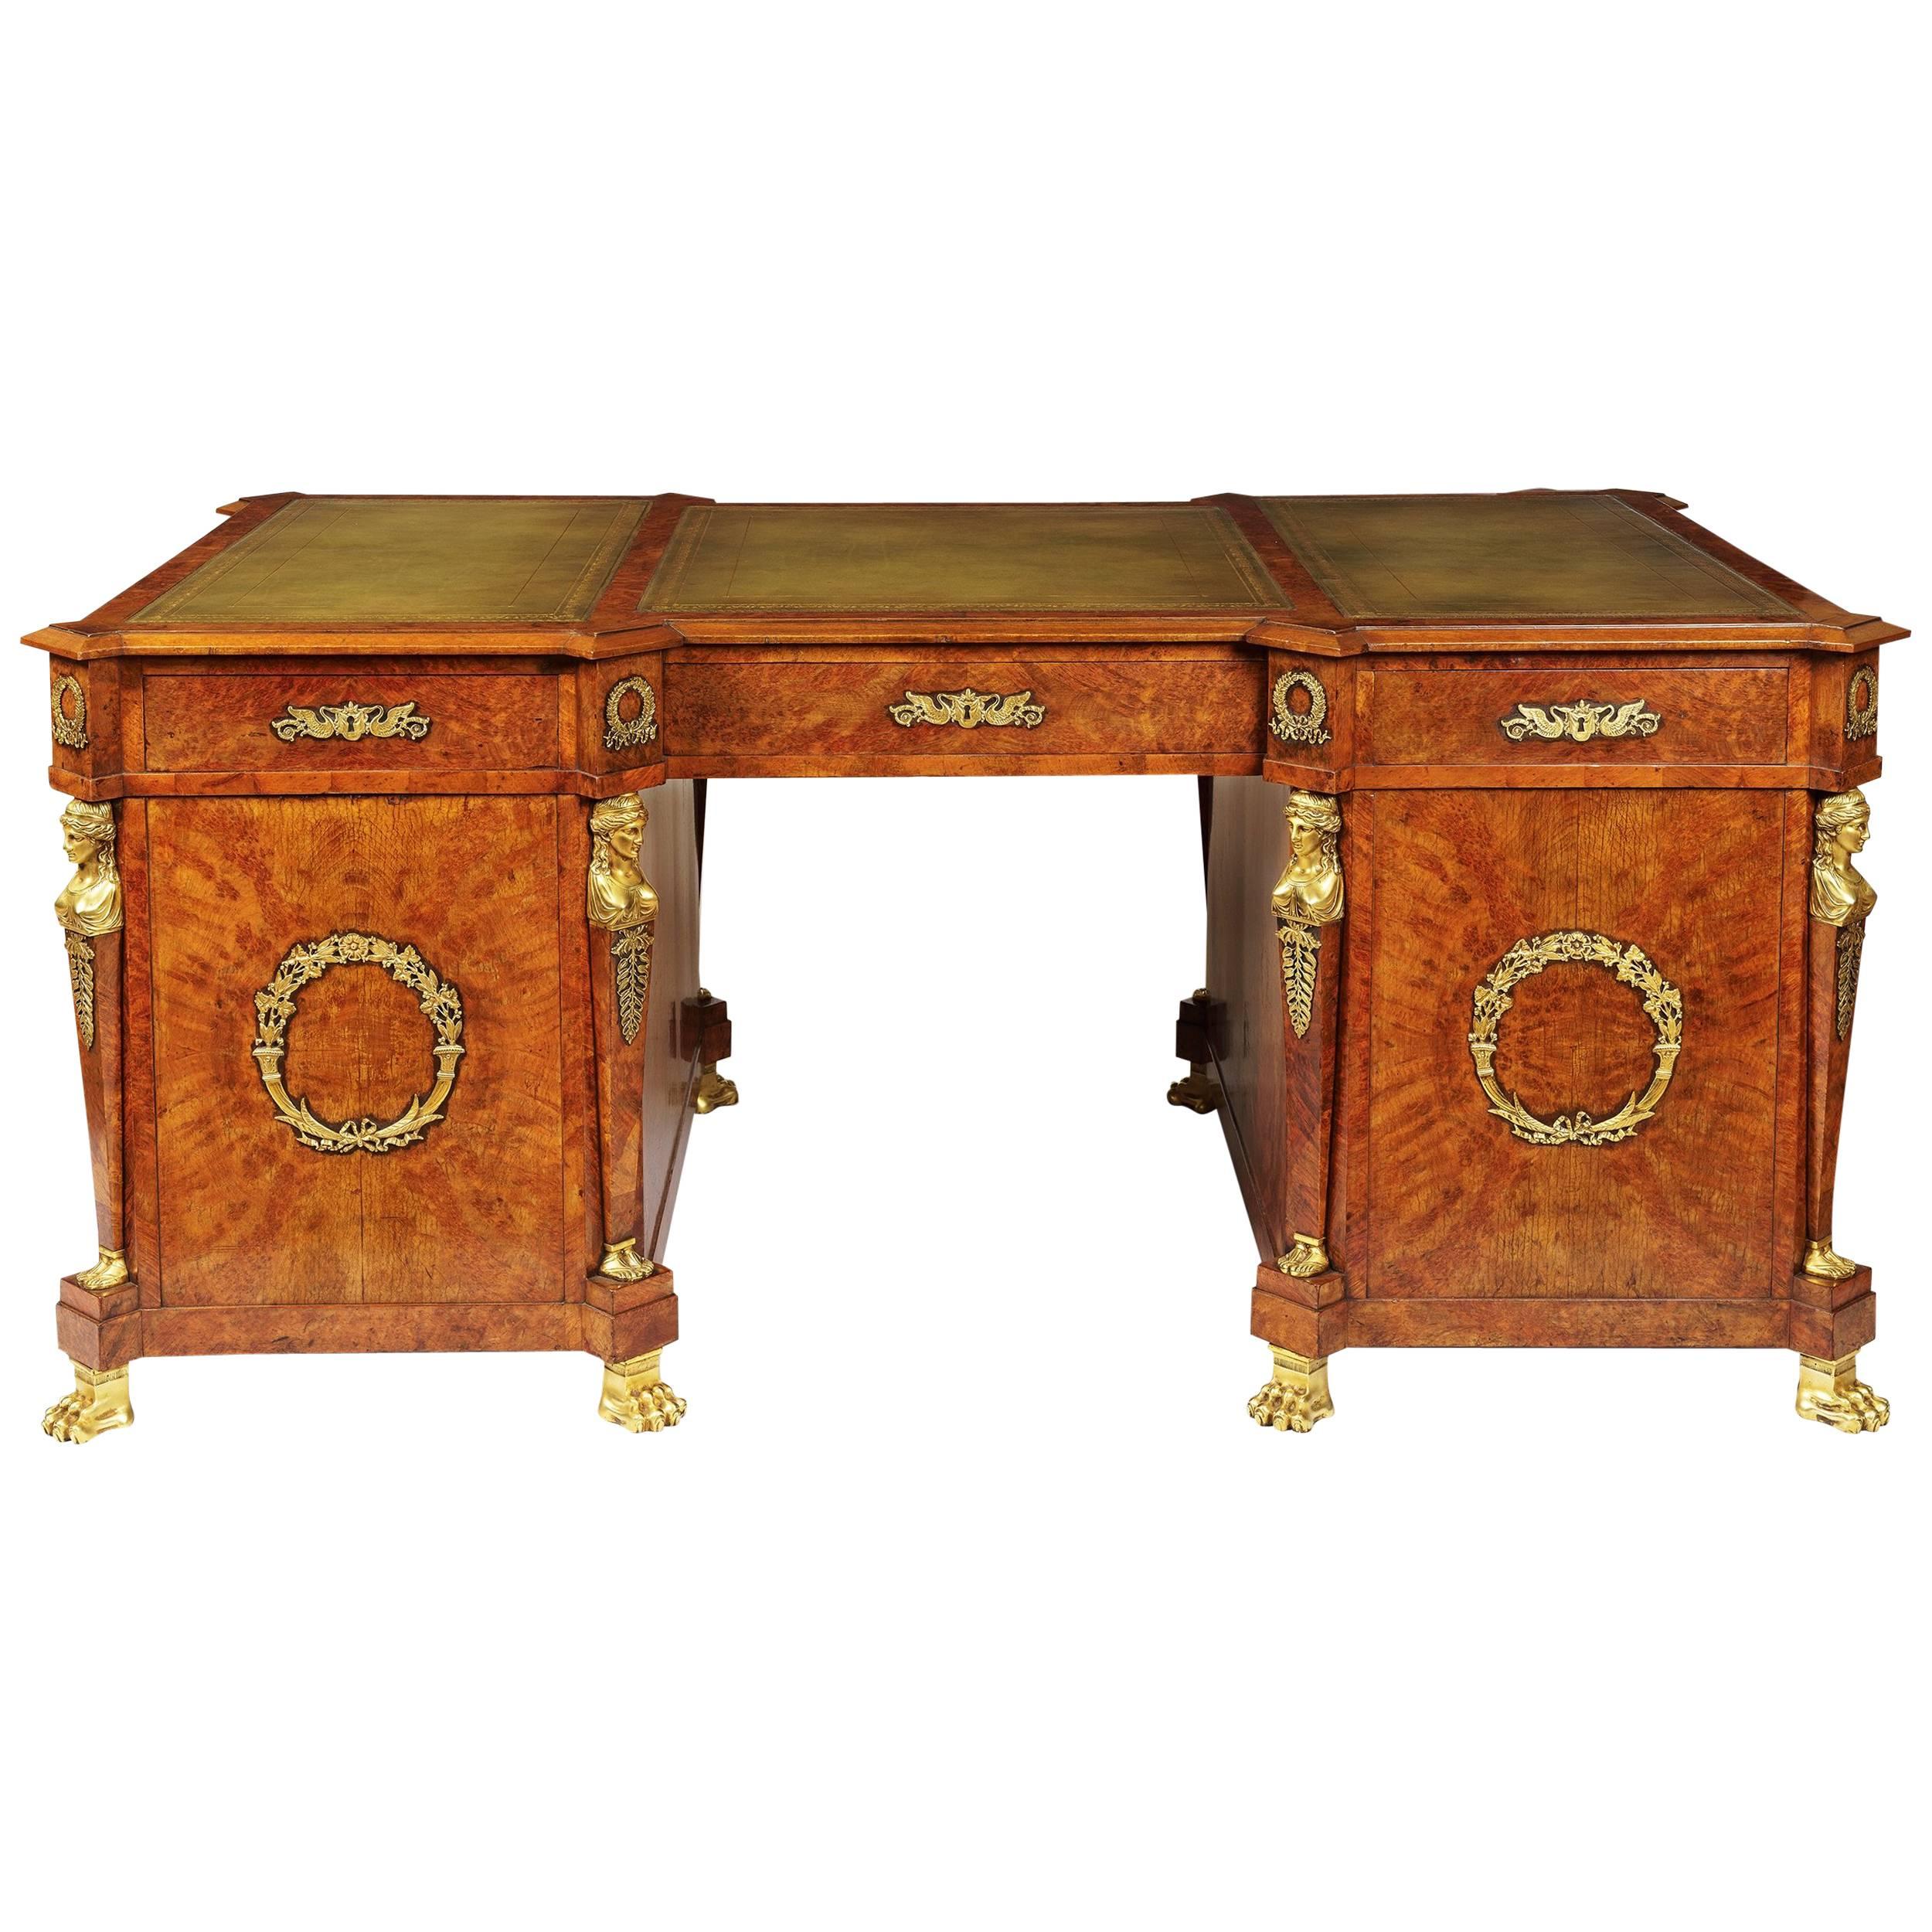 19th Century Birch and Morocco Leather Pedestal Desk in the French Empire Manner For Sale